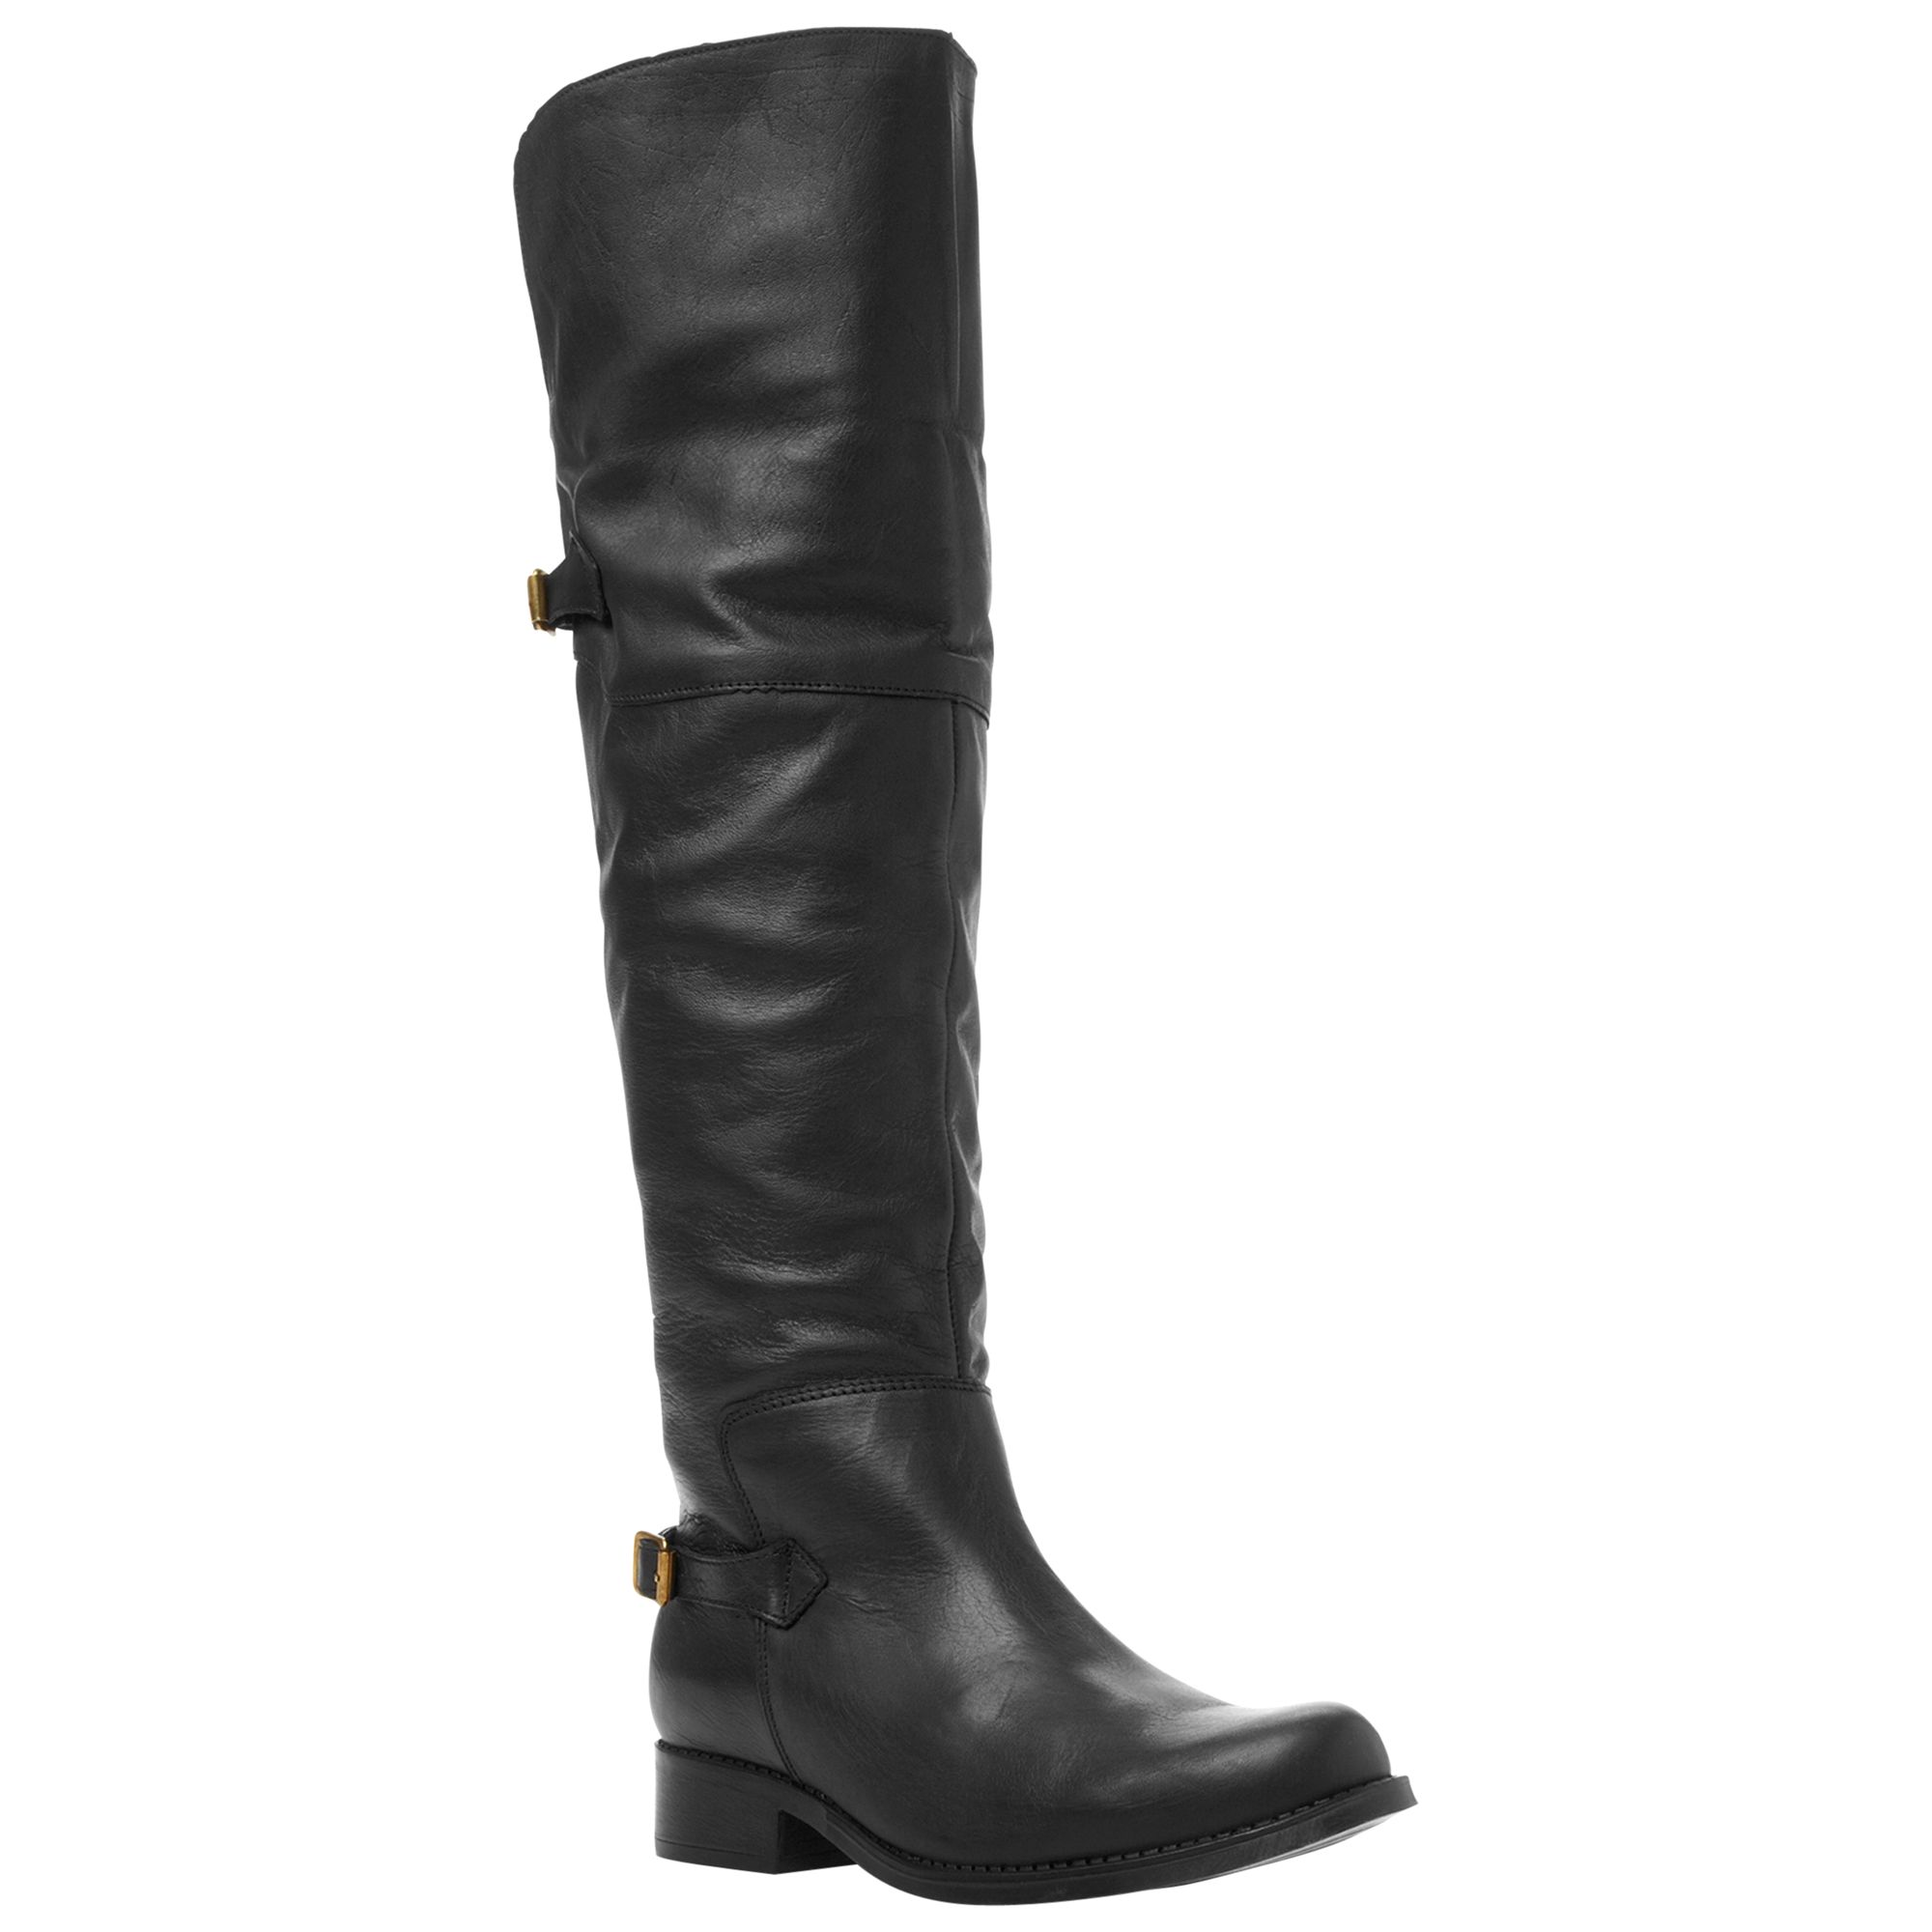 Buy Steve Madden Ottowa Leather Over the Knee Boots Online at ...